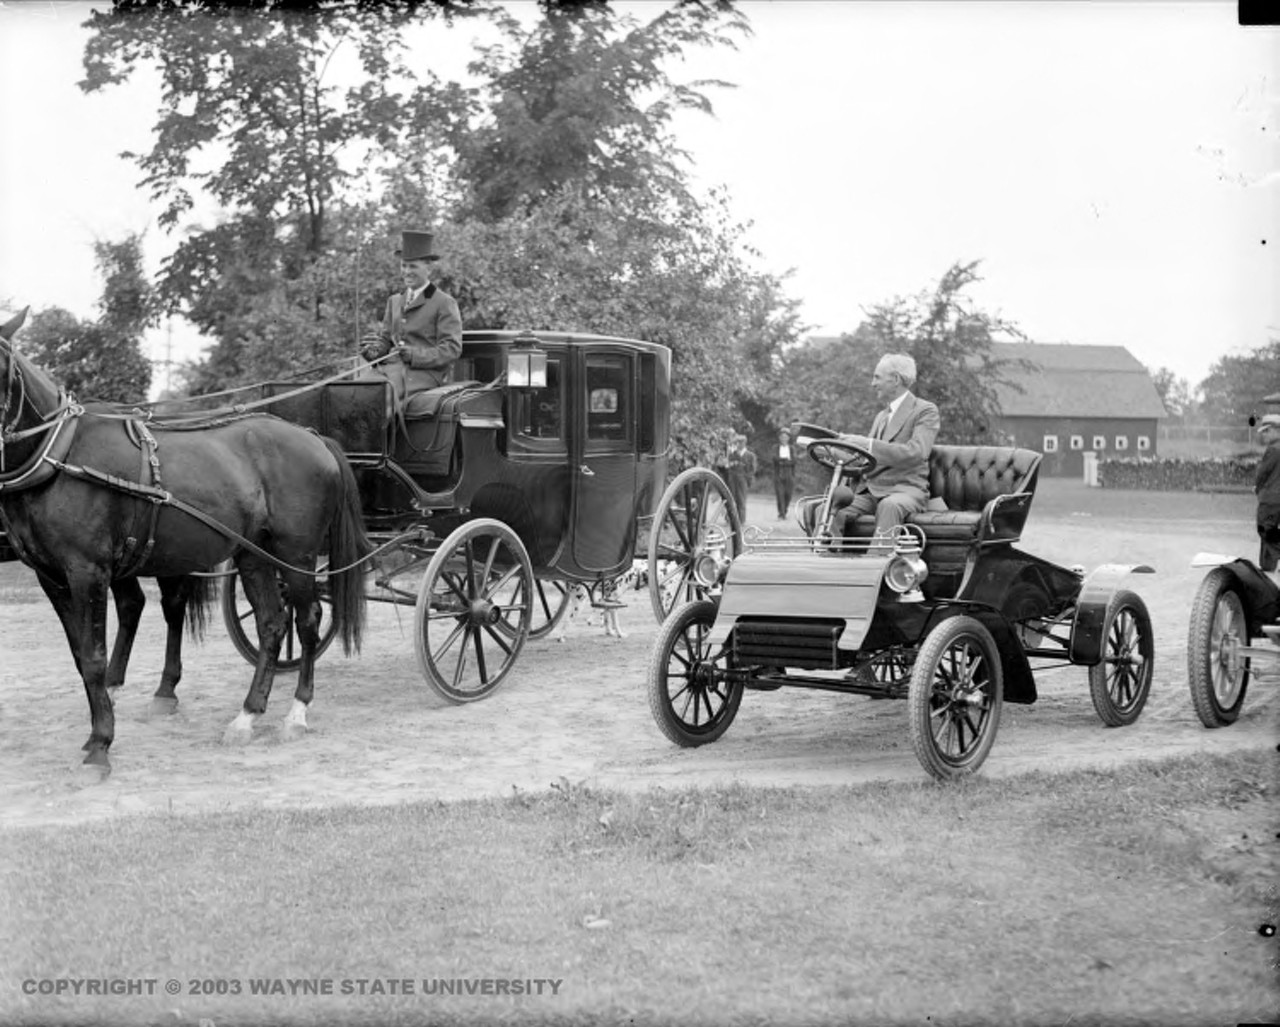 Henry Ford Driving Old Model Car Passing a Stage Coach
from Virtual Motor City (Photo credit: Detroit News Collection, Walter P. Reuther Library, Wayne State University)